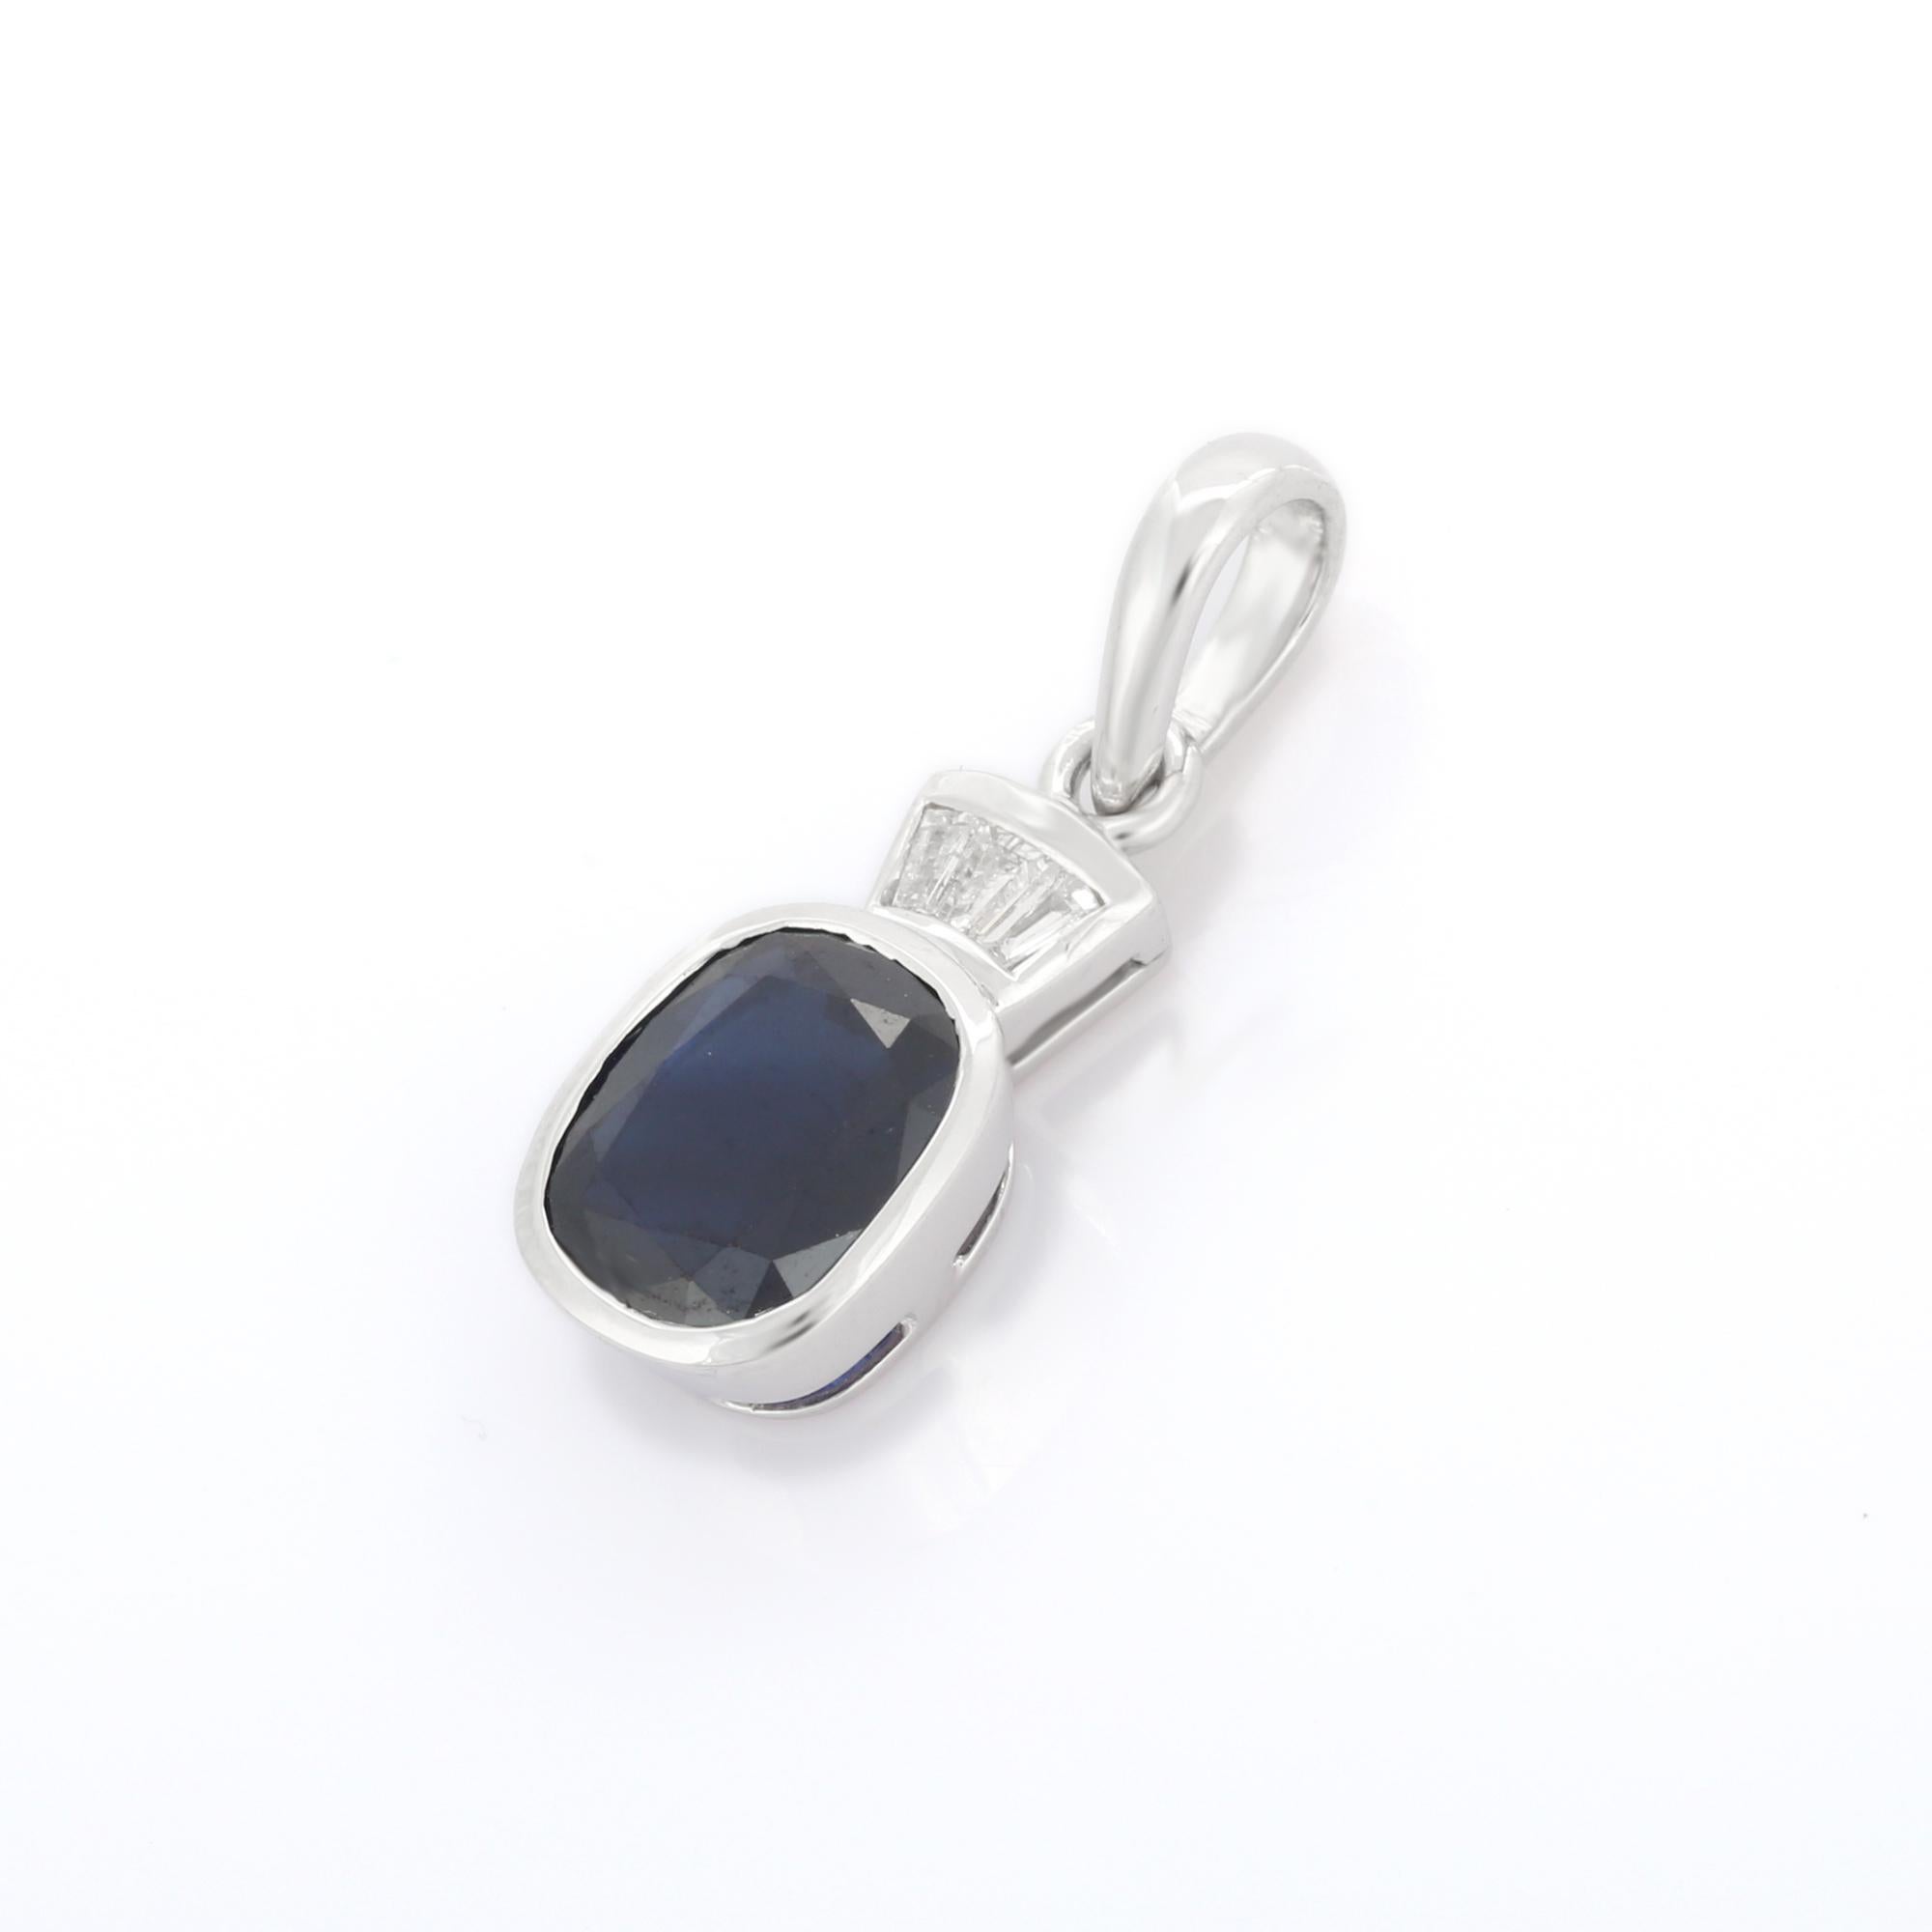 3.45 Carat Cushion Cut Blue Sapphire Pendant with Diamonds in 18K White Gold In New Condition For Sale In Houston, TX